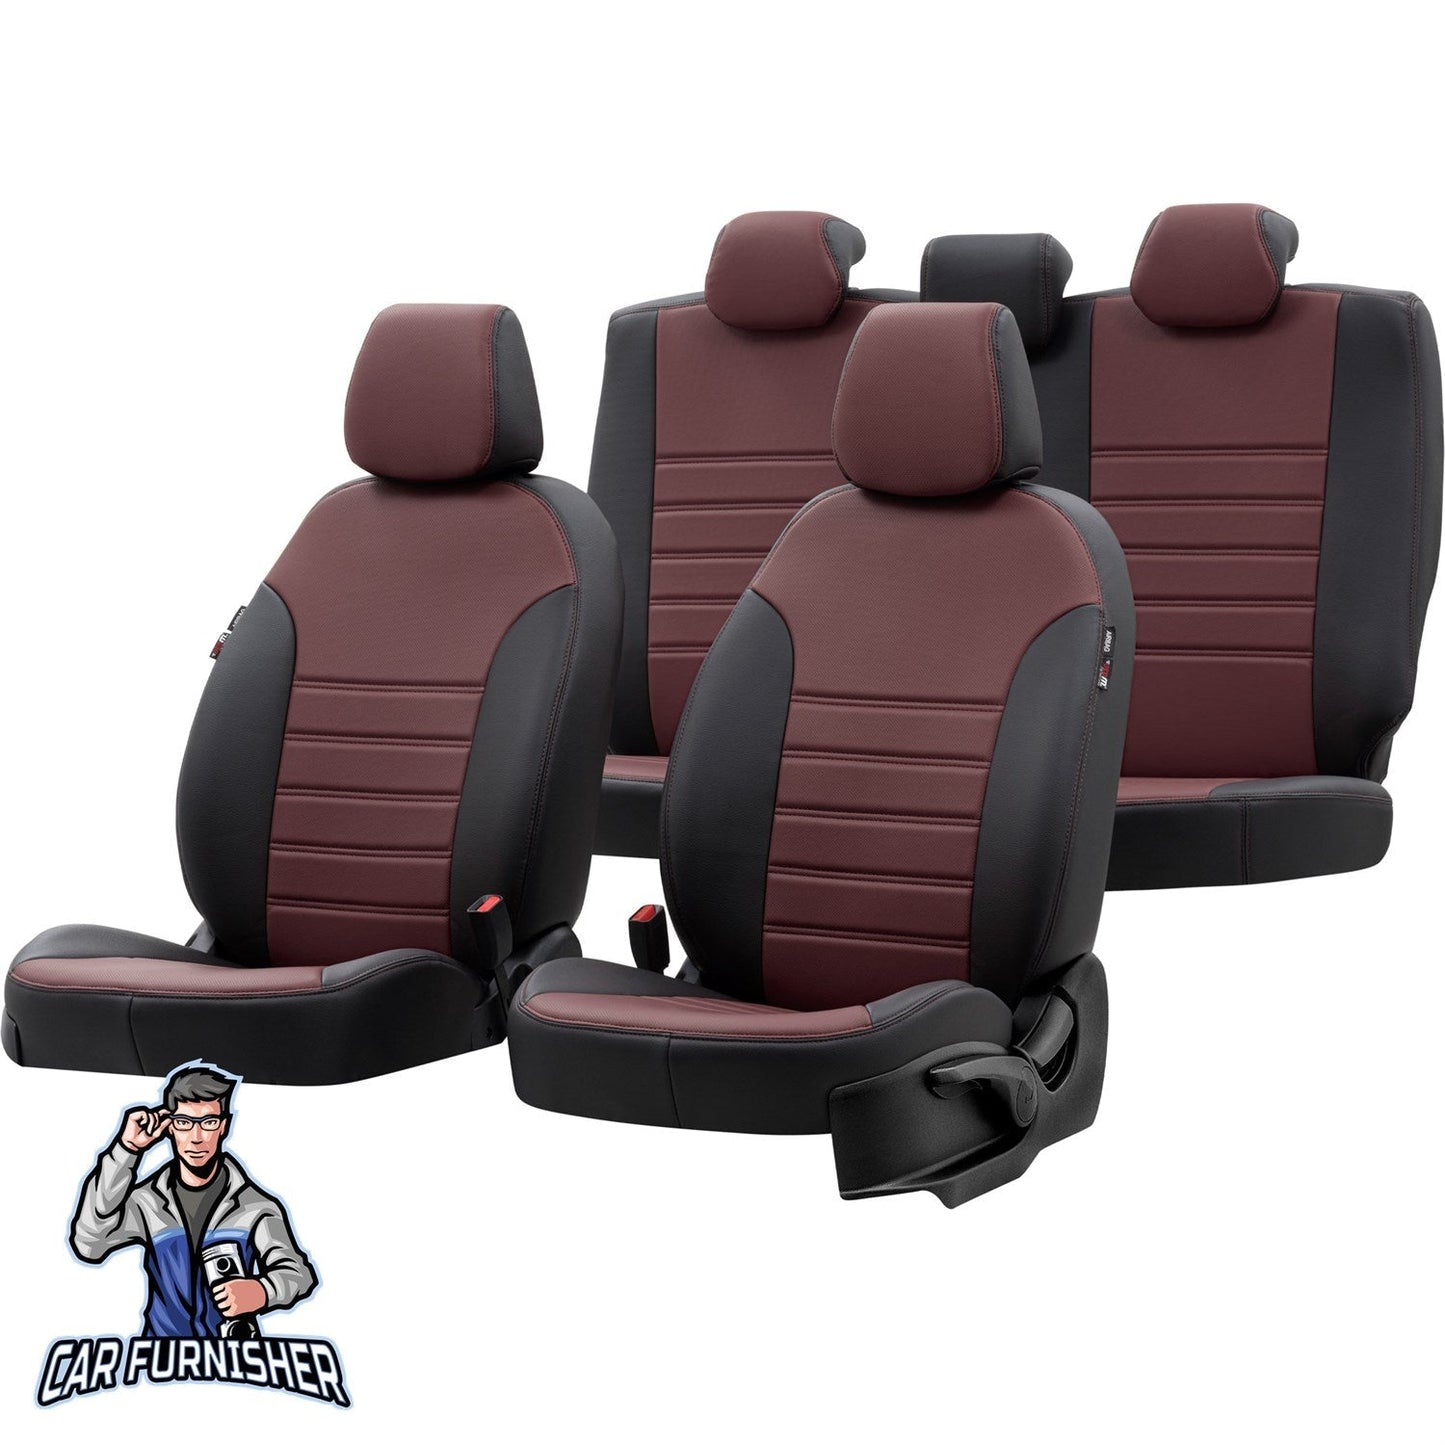 Chevrolet Aveo Seat Cover Istanbul Leather Design Burgundy Leather